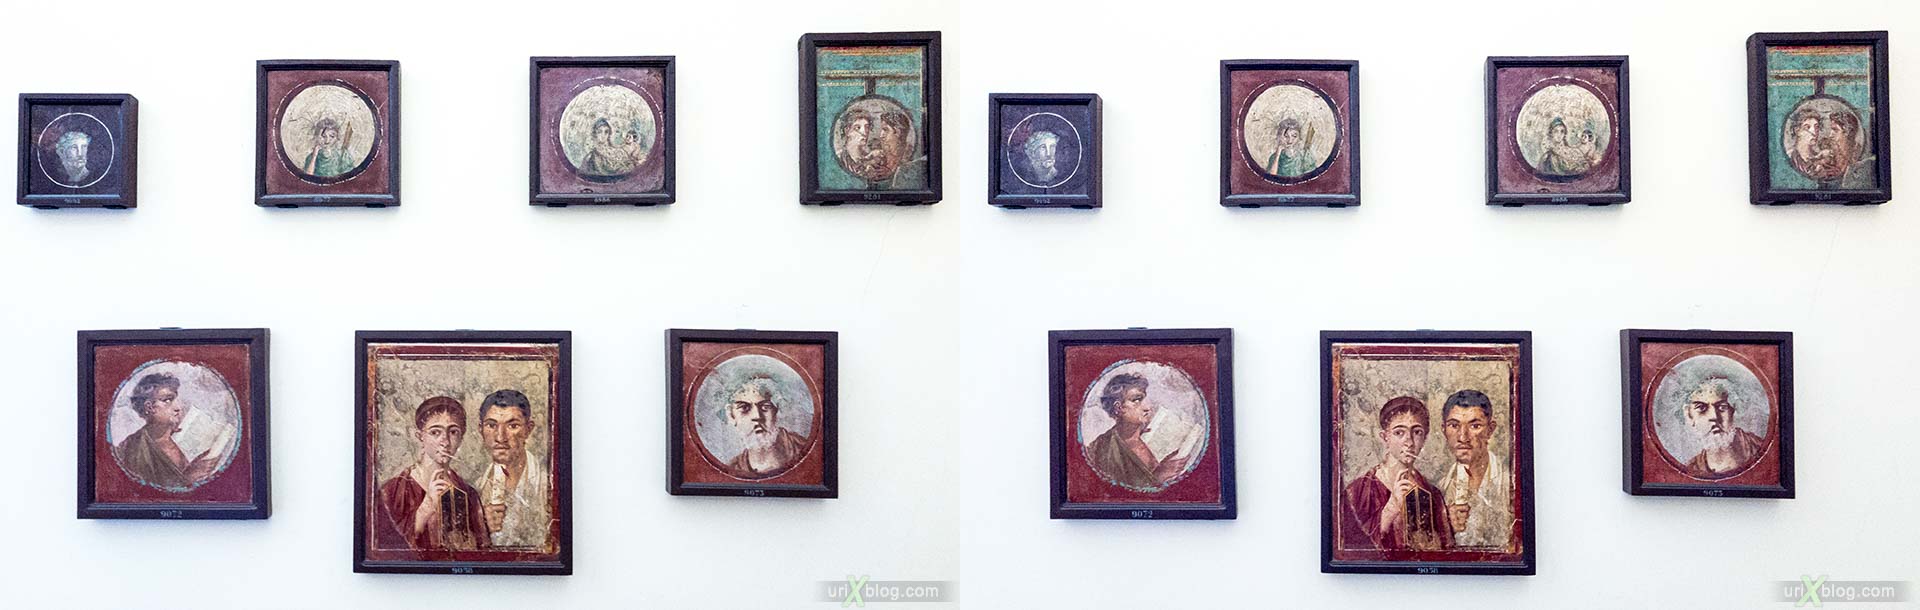 frescoes, National Archaeological Museum of Naples, ancient Rome, Pompei, exhibition, Naples, Italy, 3D, stereo pair, cross-eyed, crossview, cross view stereo pair, stereoscopic